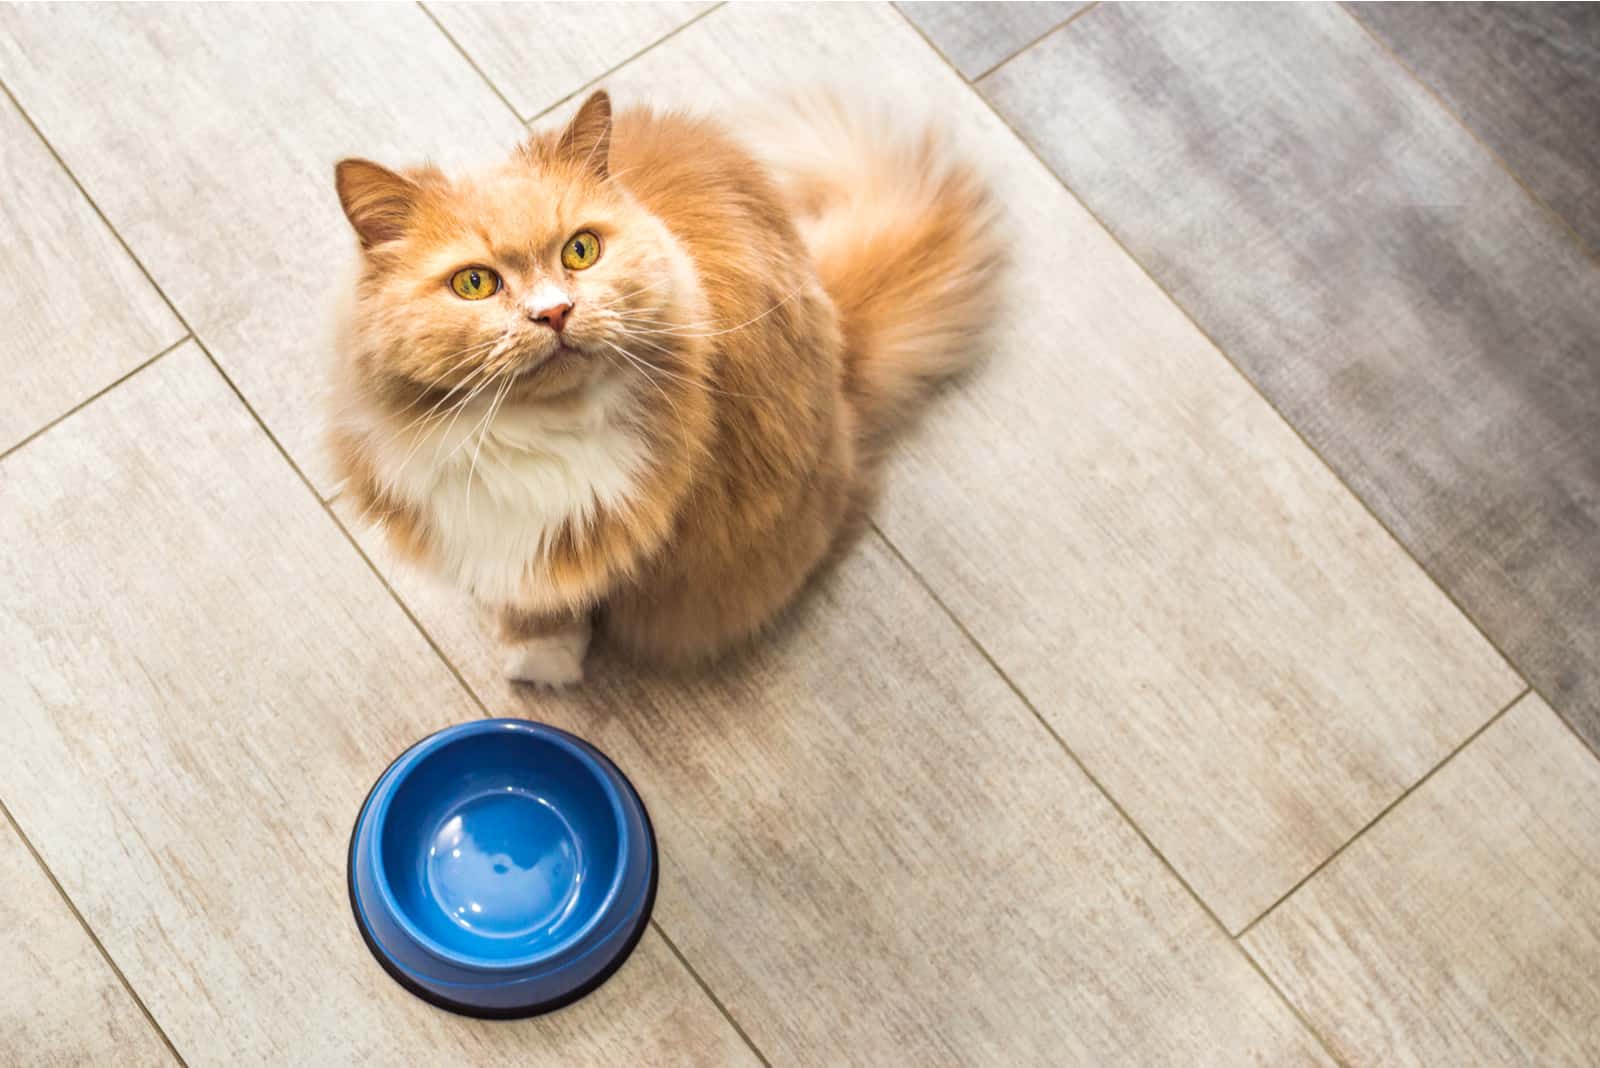 fluffy cat stands by a bowl on the kitchen floor and waits for food